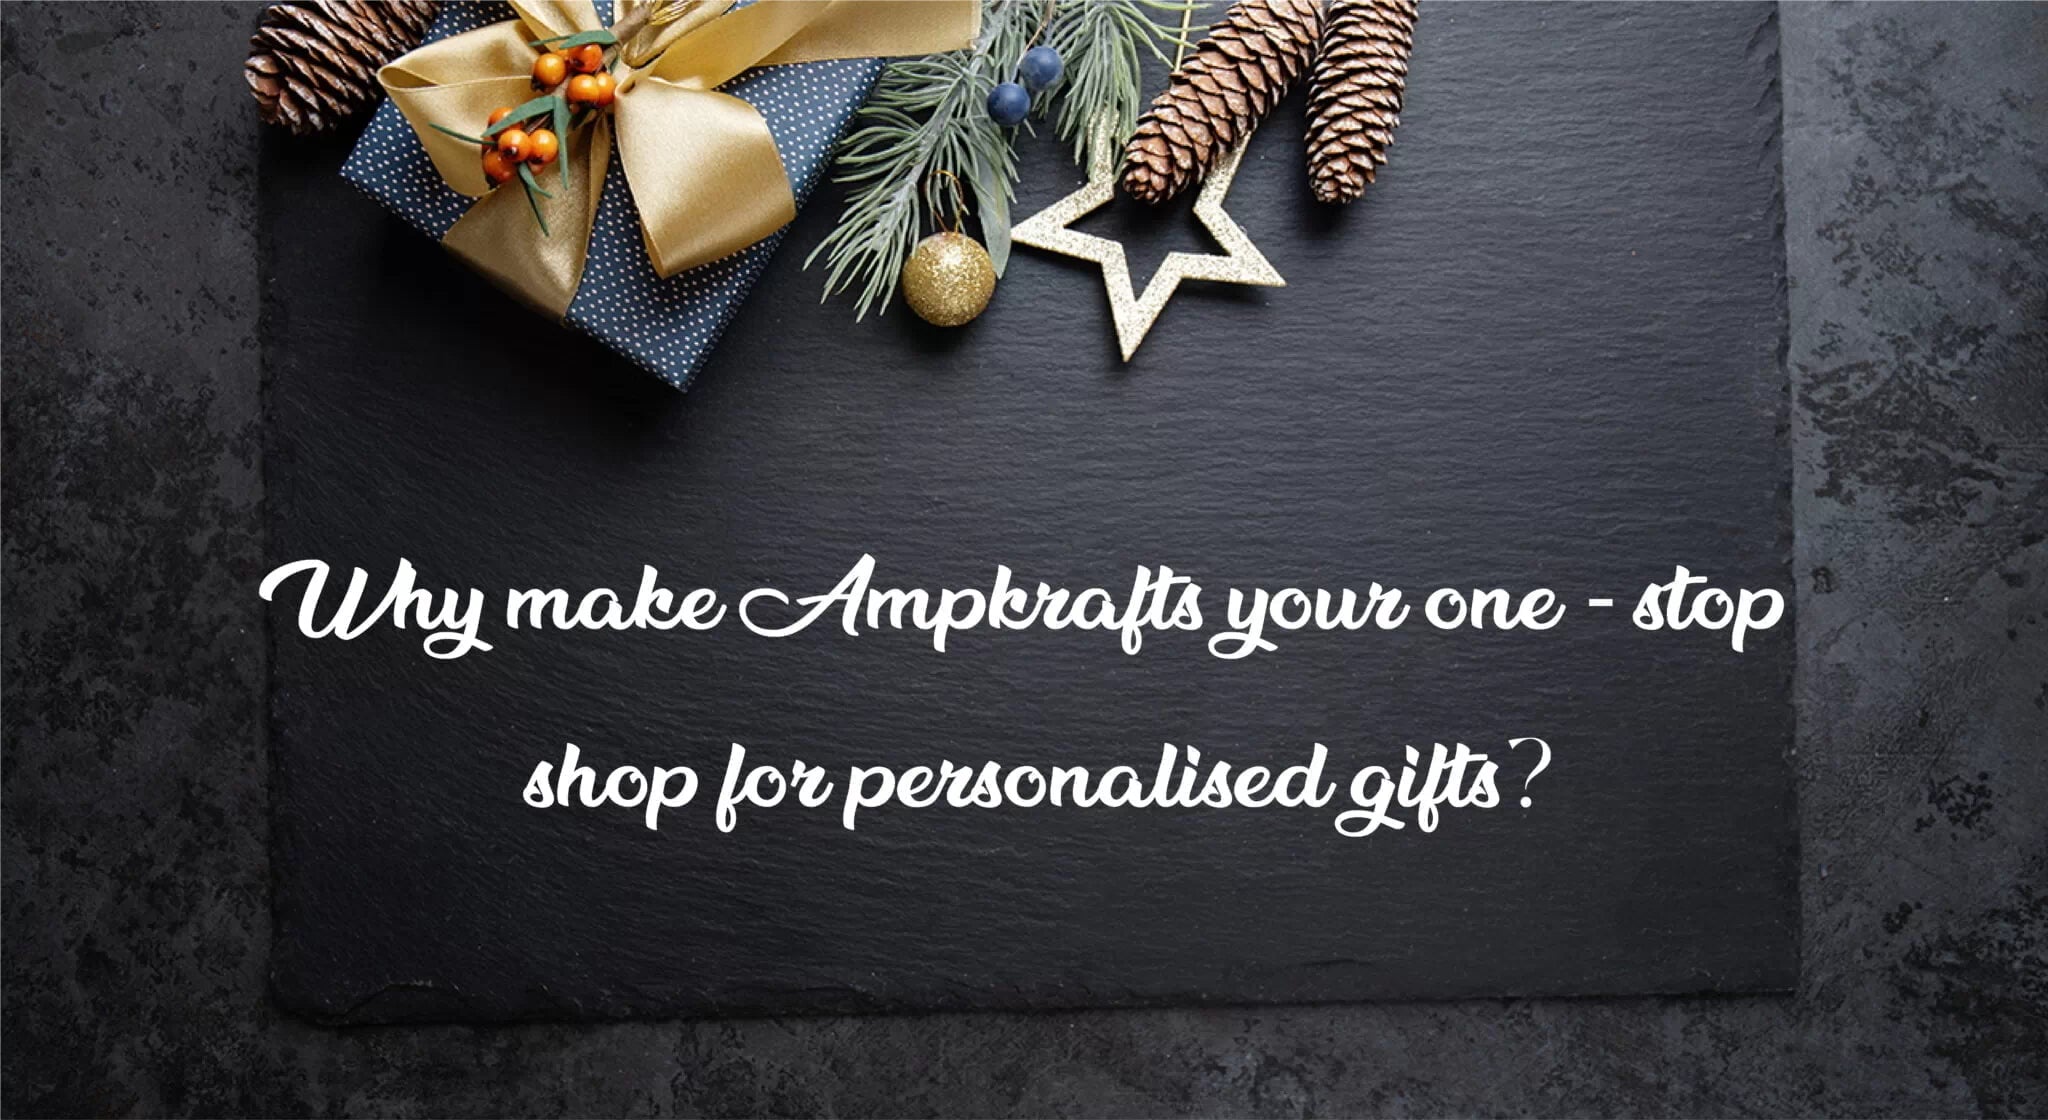 Why Make Ampkrafts Your One-Stop Shop For Personalized Gifts?